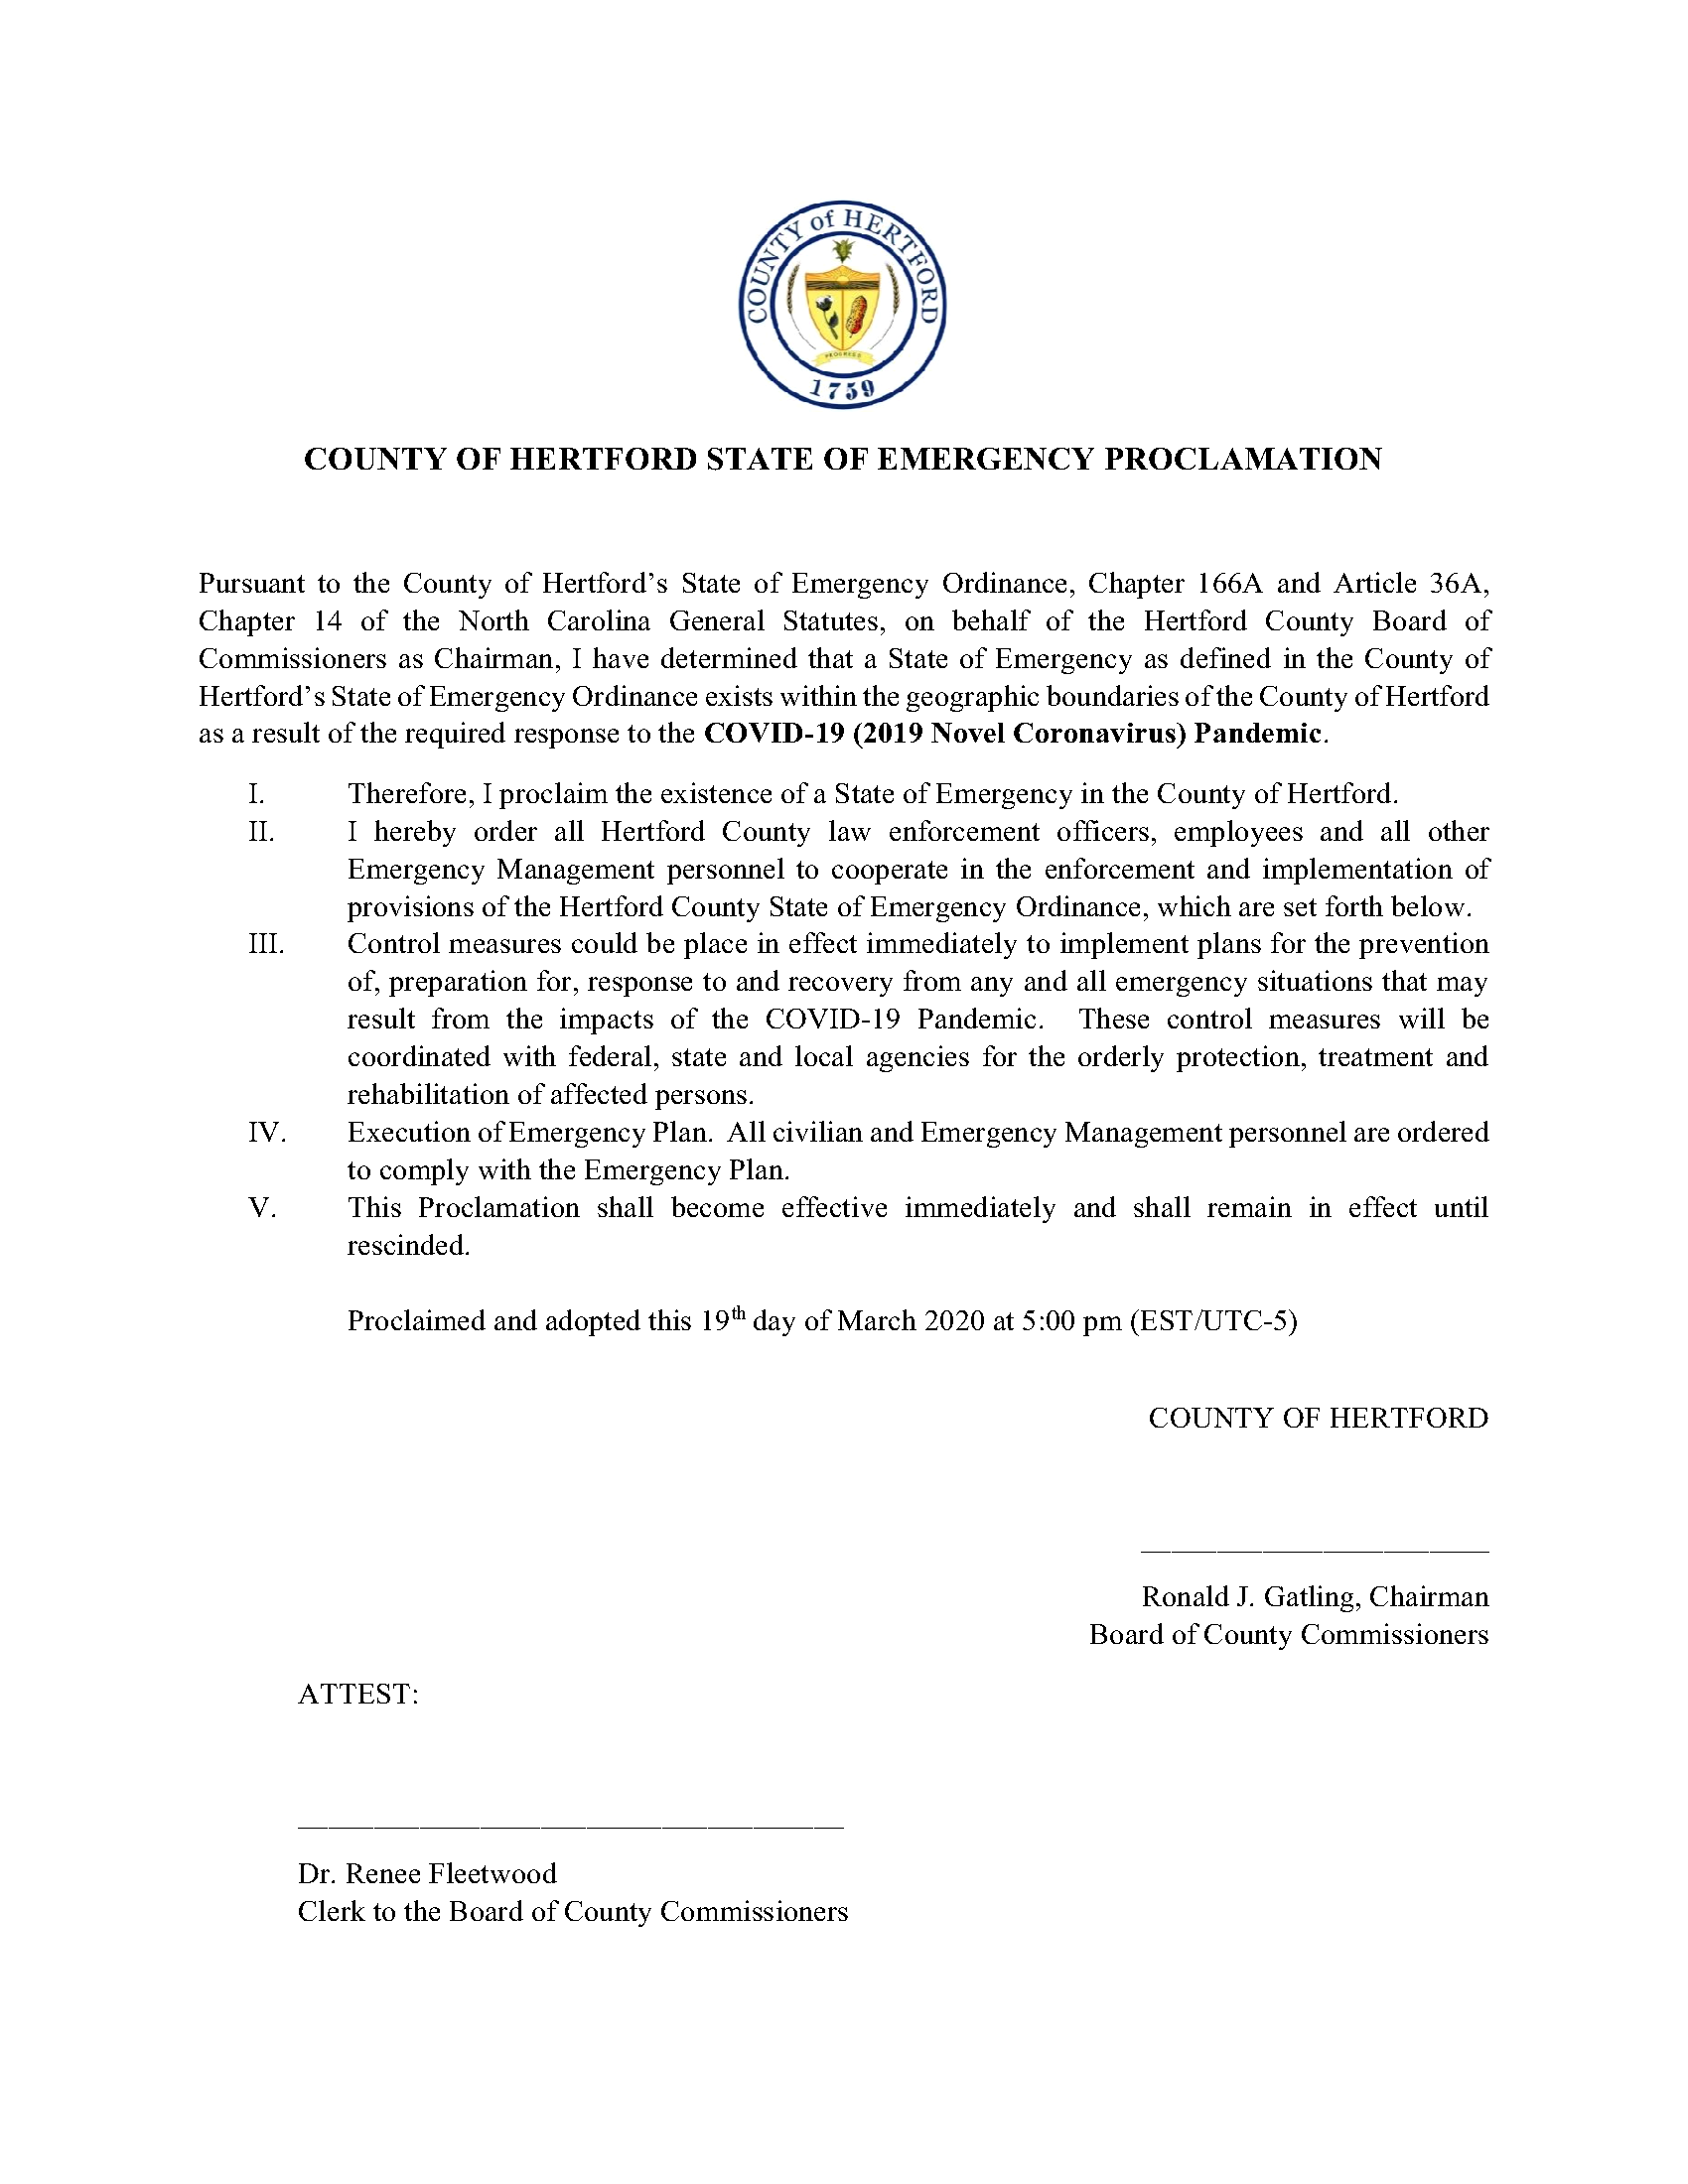 COVID-19 State of Emergency Proclamation 031920